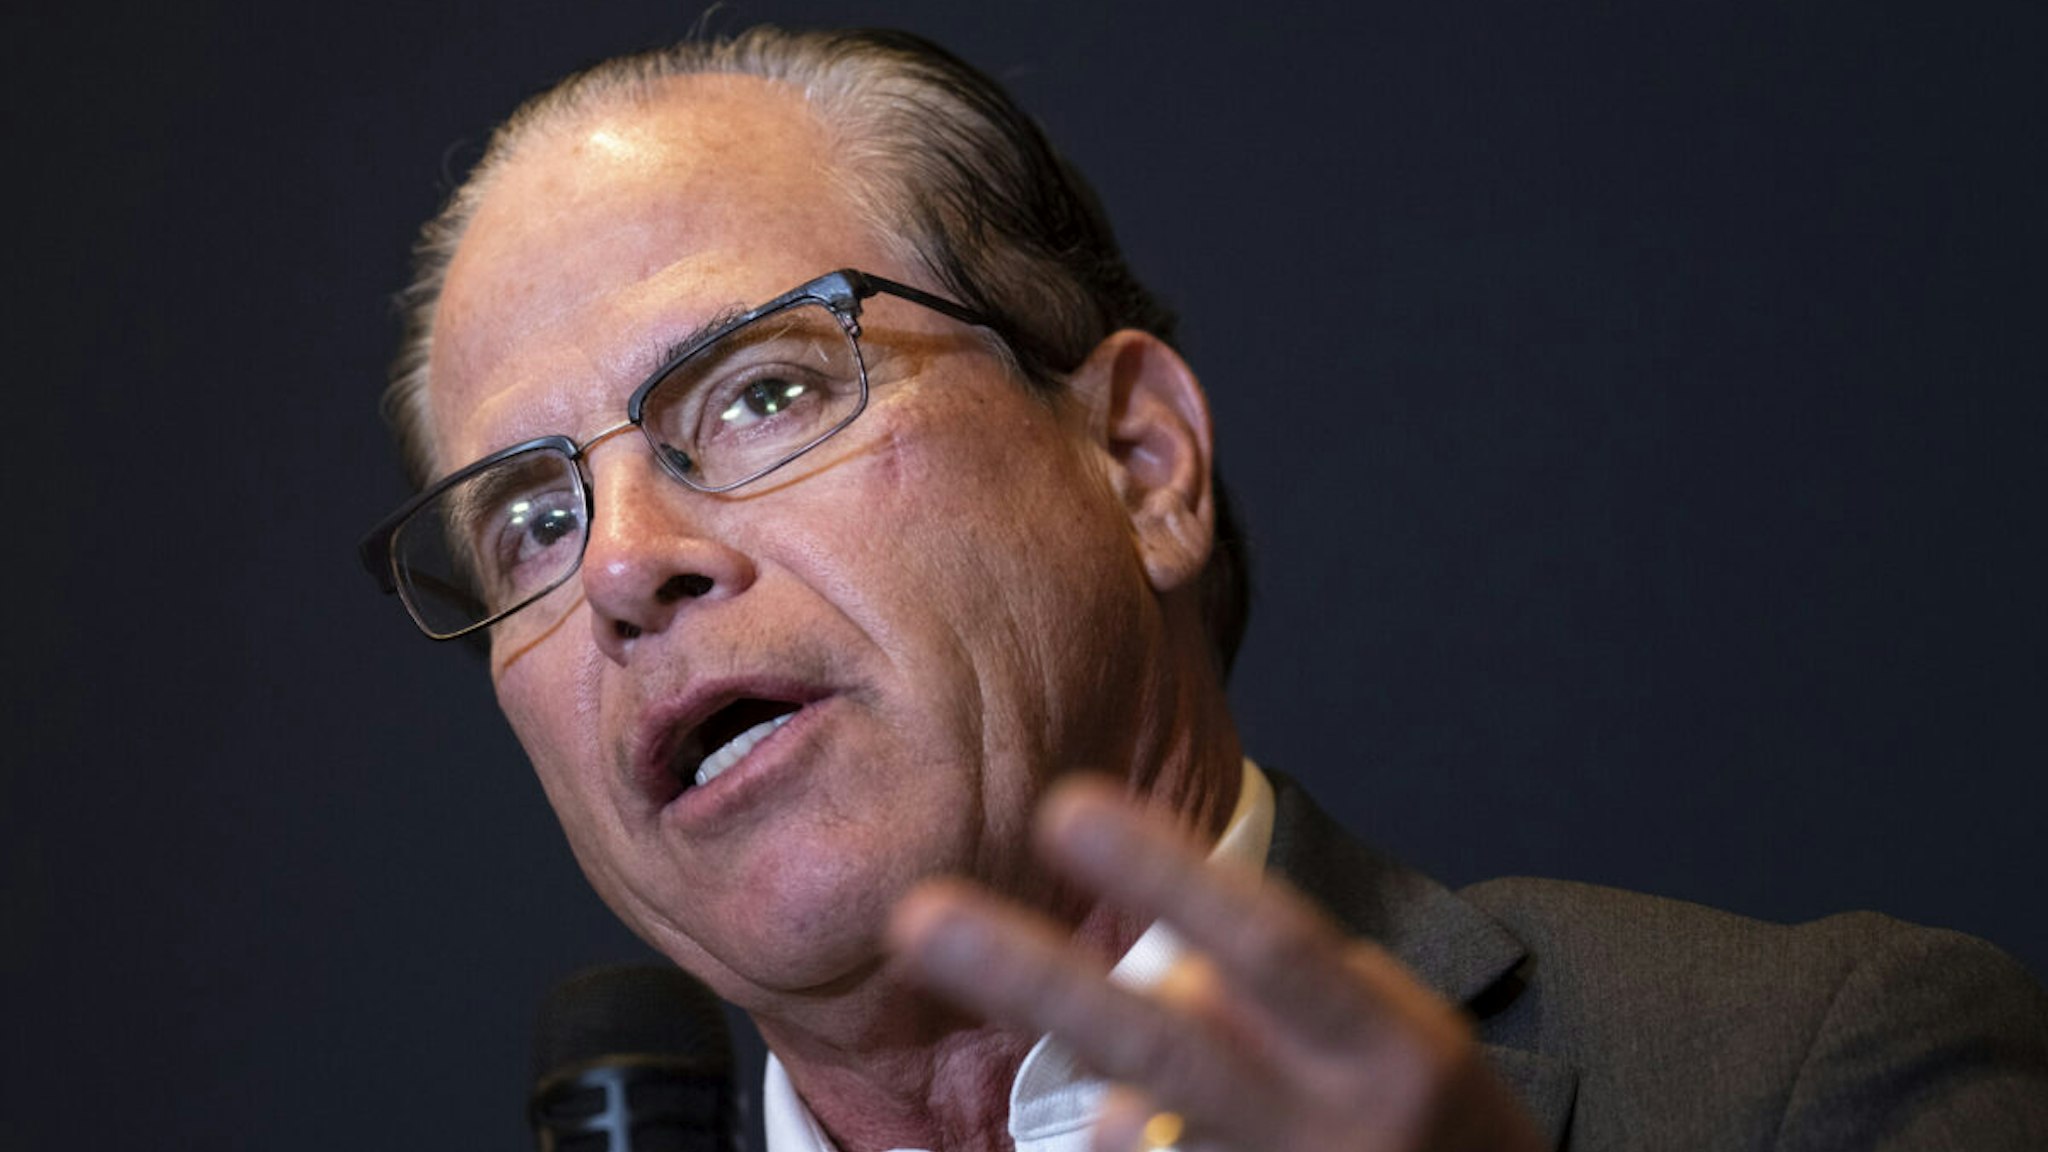 Sen. Mike Braun (R-IN) speaks during a panel discussion on the economy during the America First Agenda Summit, at the Marriott Marquis Hotel on July 26, 2022 in Washington, DC.